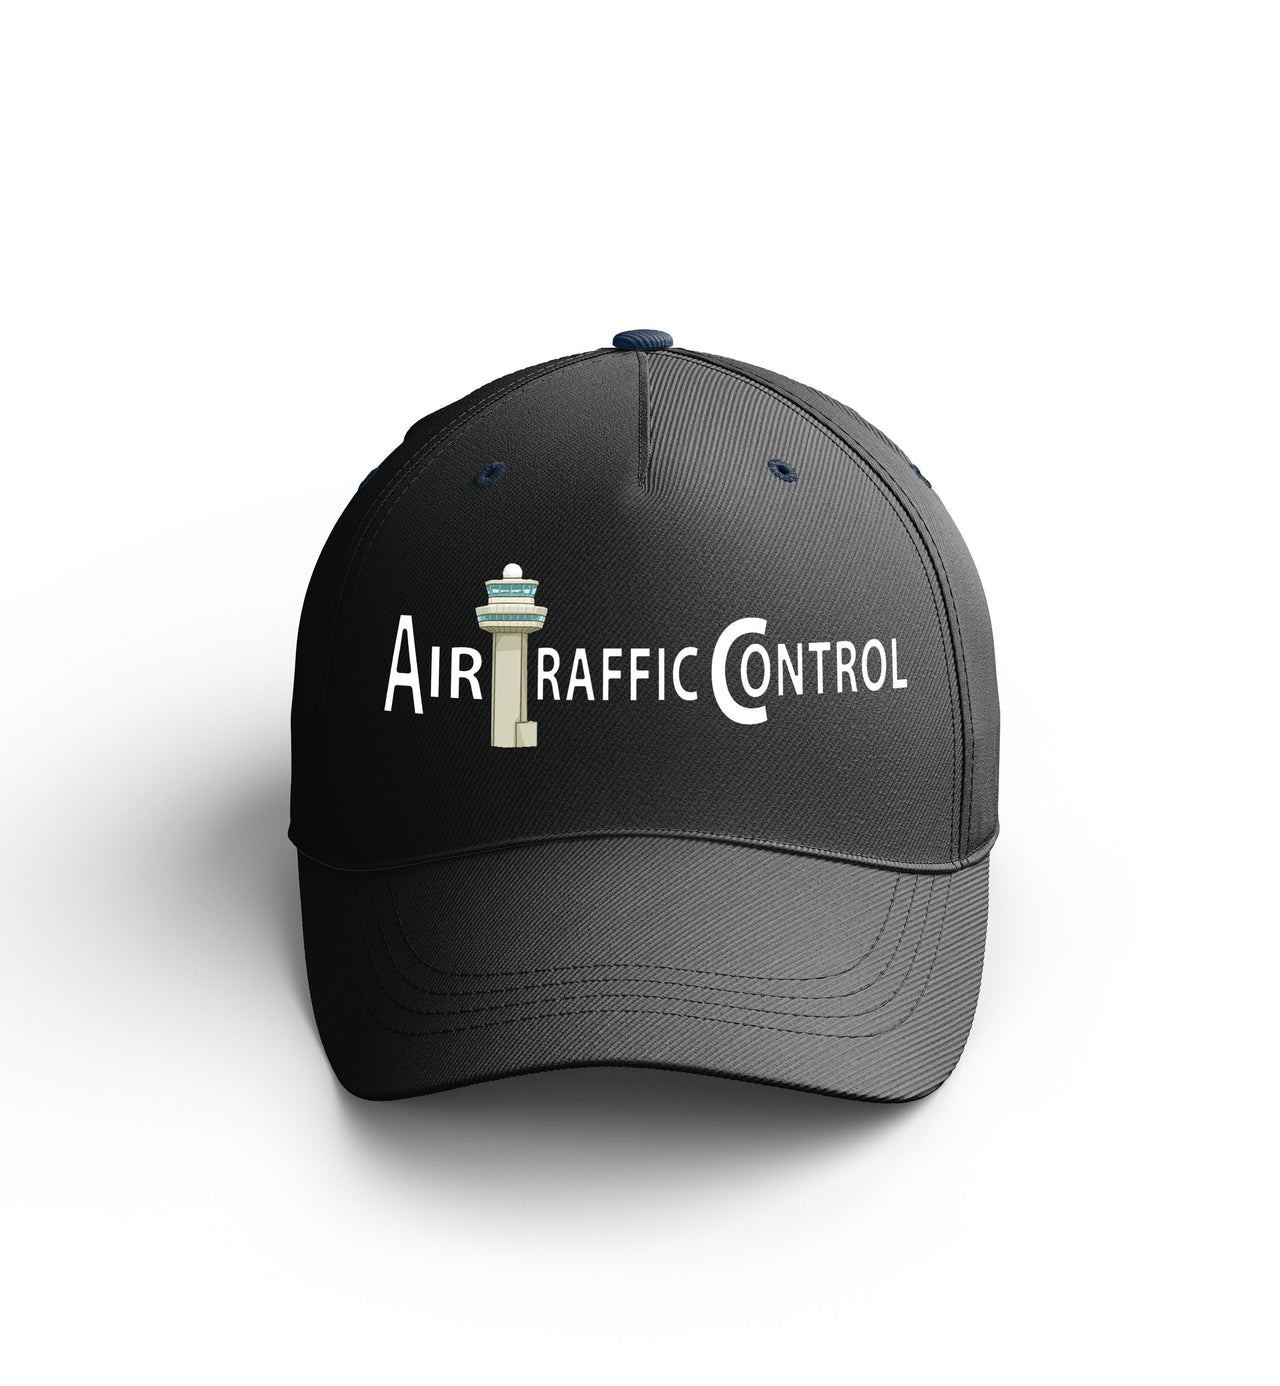 Customizable Name & Air Traffic Control Embroidered Hats